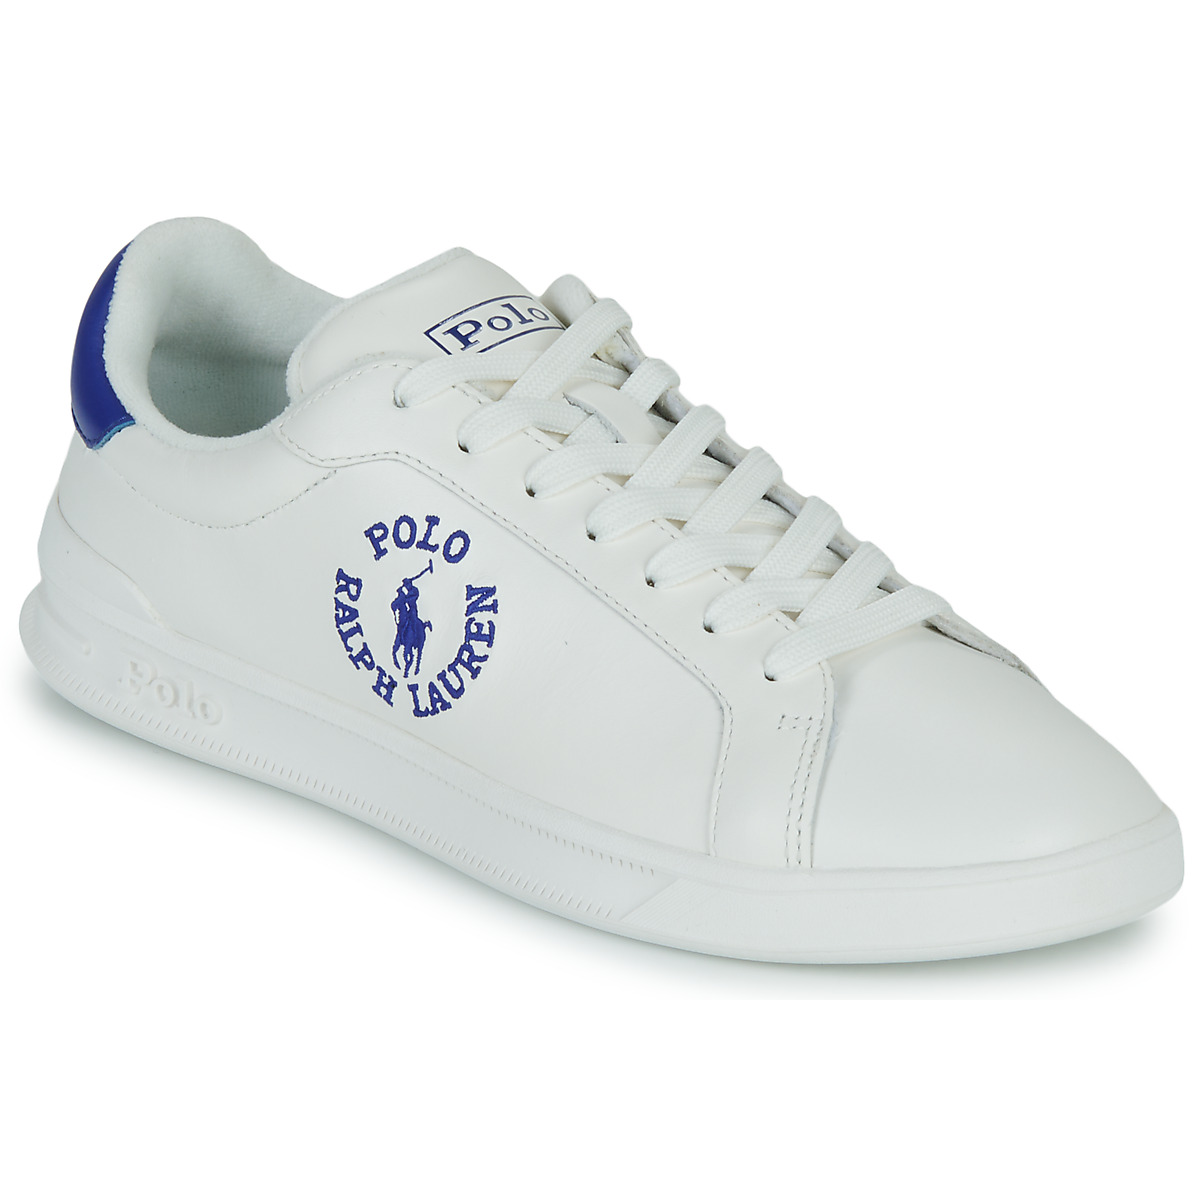 Polo Ralph Lauren Hrt Crt Cl-sneakers-low Top Lace White